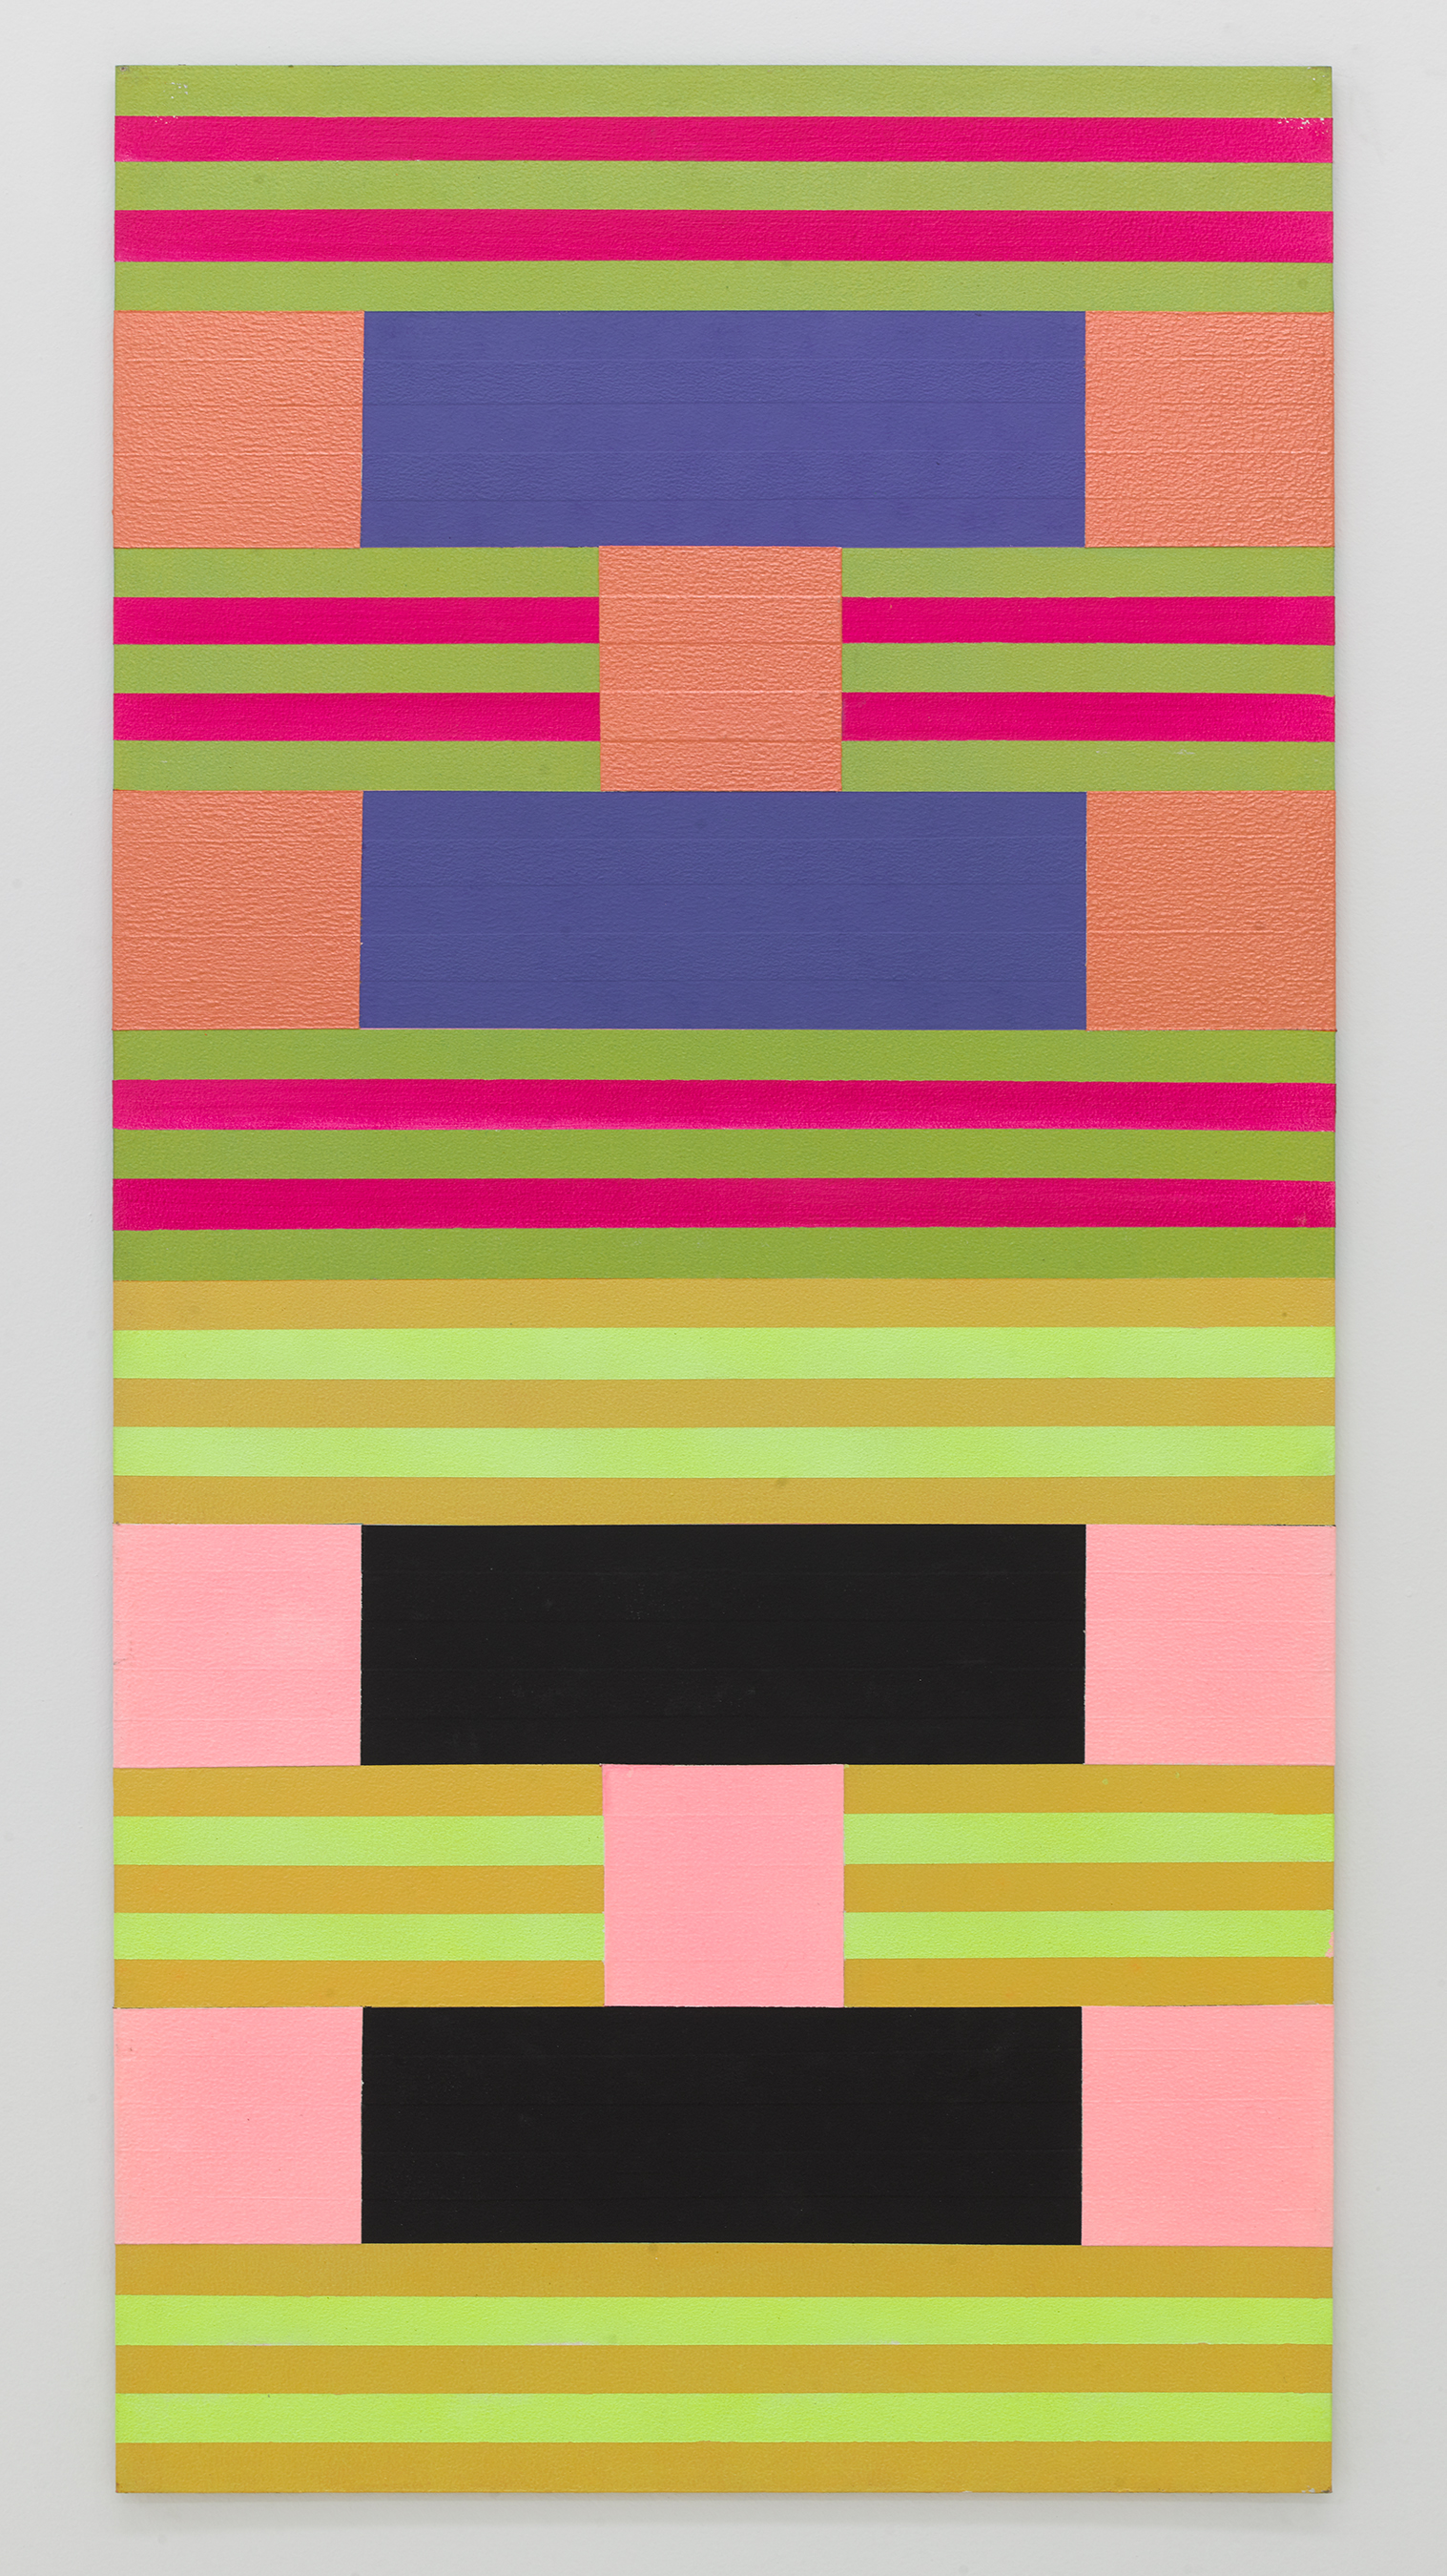  Tom Bronk,  15 (d) 1 , 2015 Acrylic on panel 48 × 24 inches 